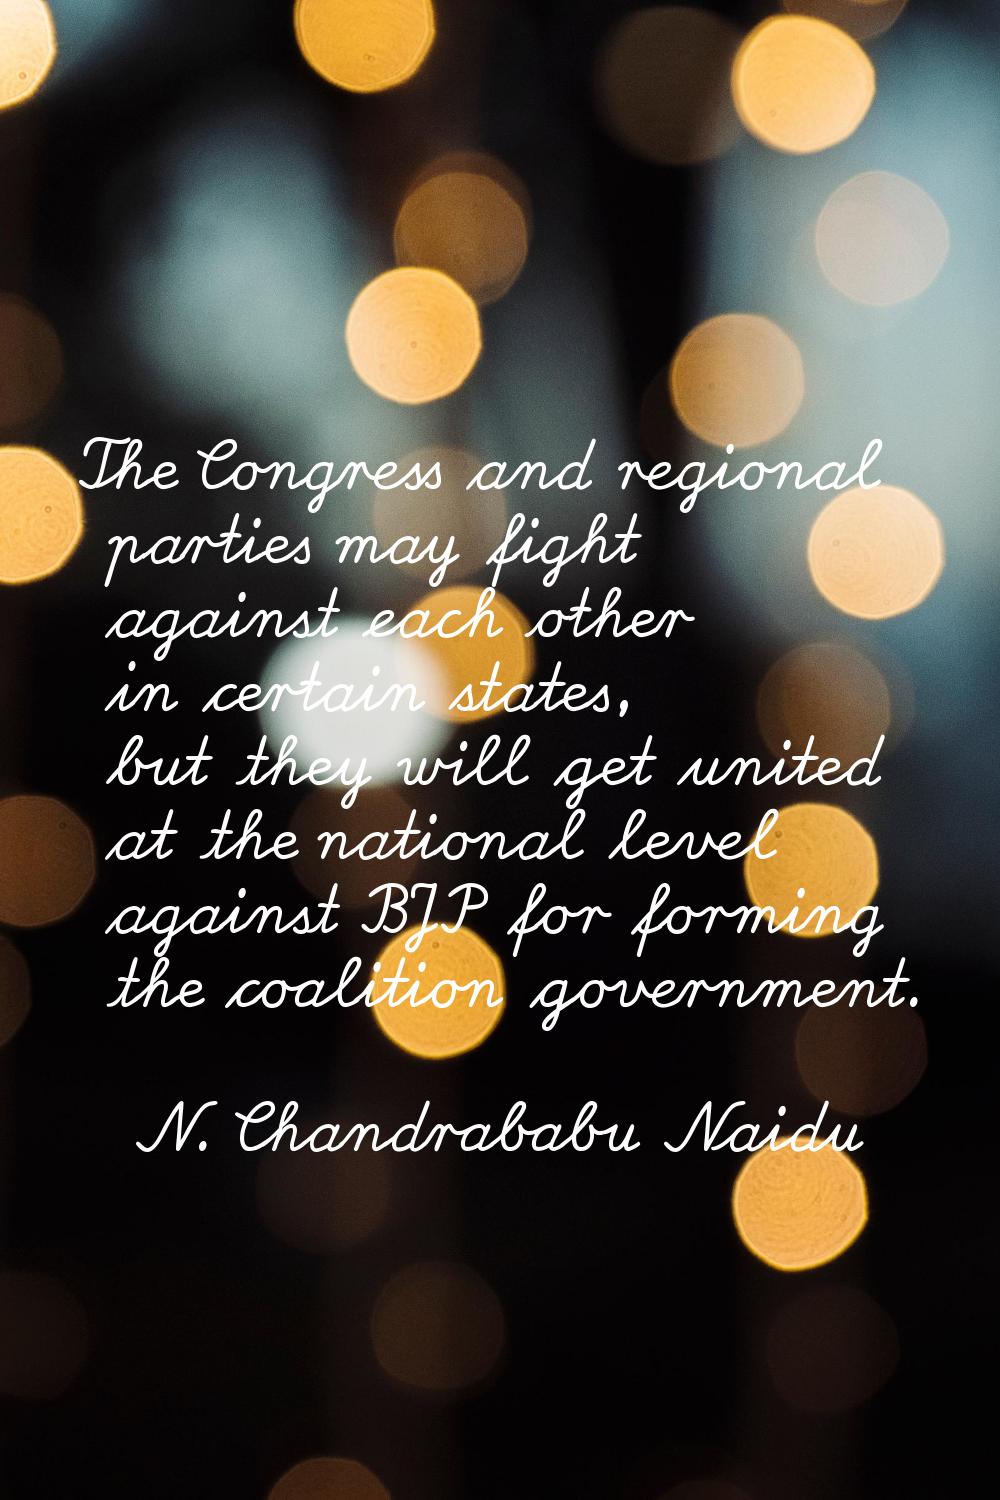 The Congress and regional parties may fight against each other in certain states, but they will get